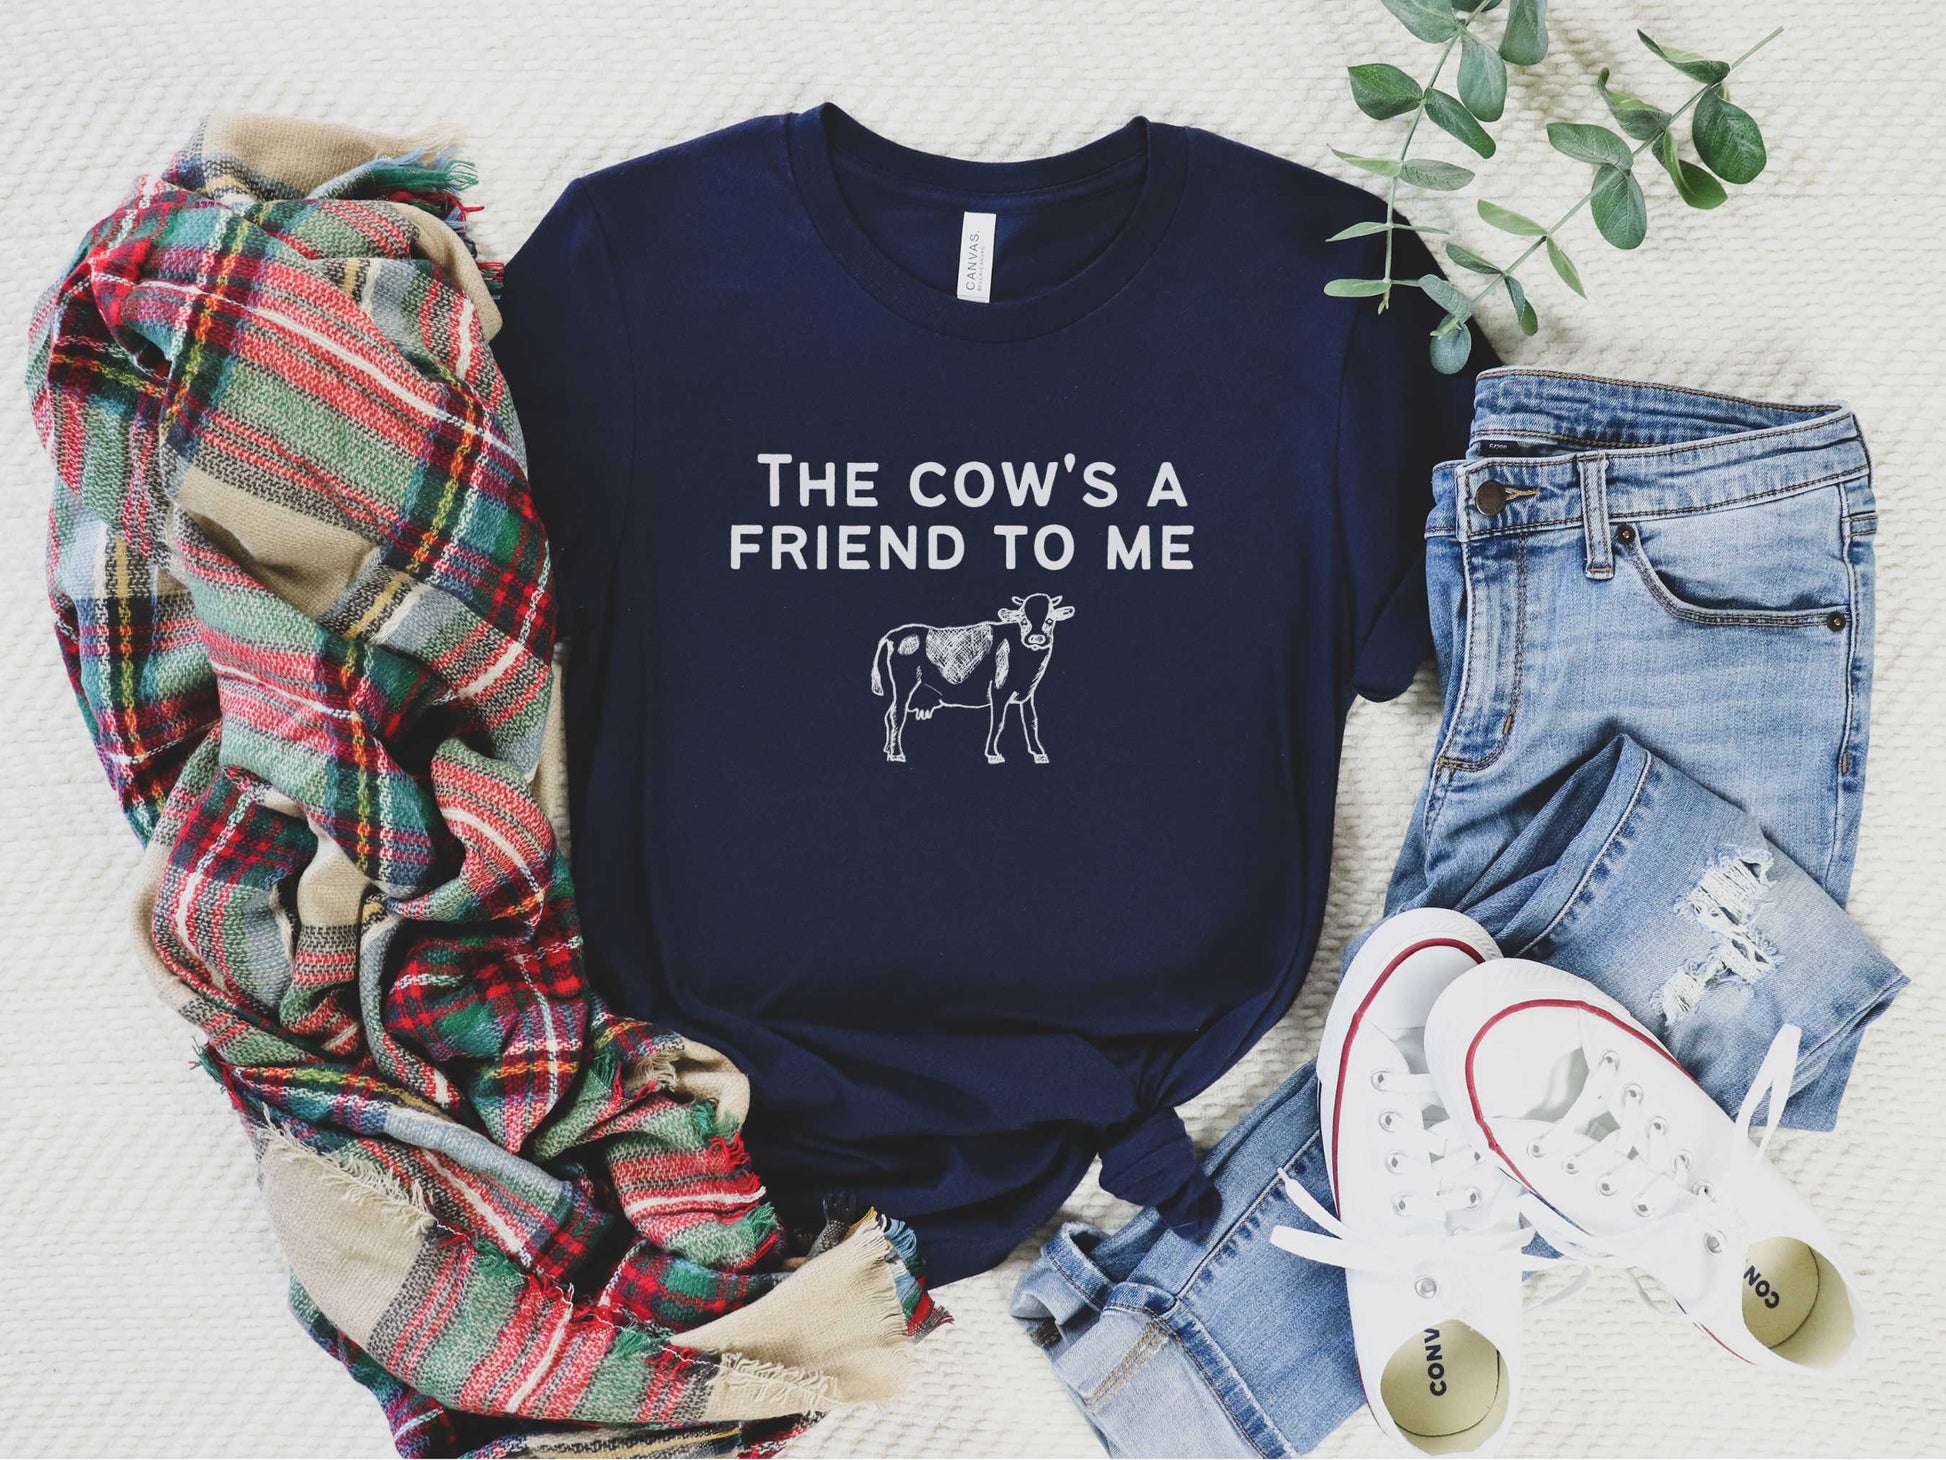 TMBG Cowtown T-Shirt in Navy